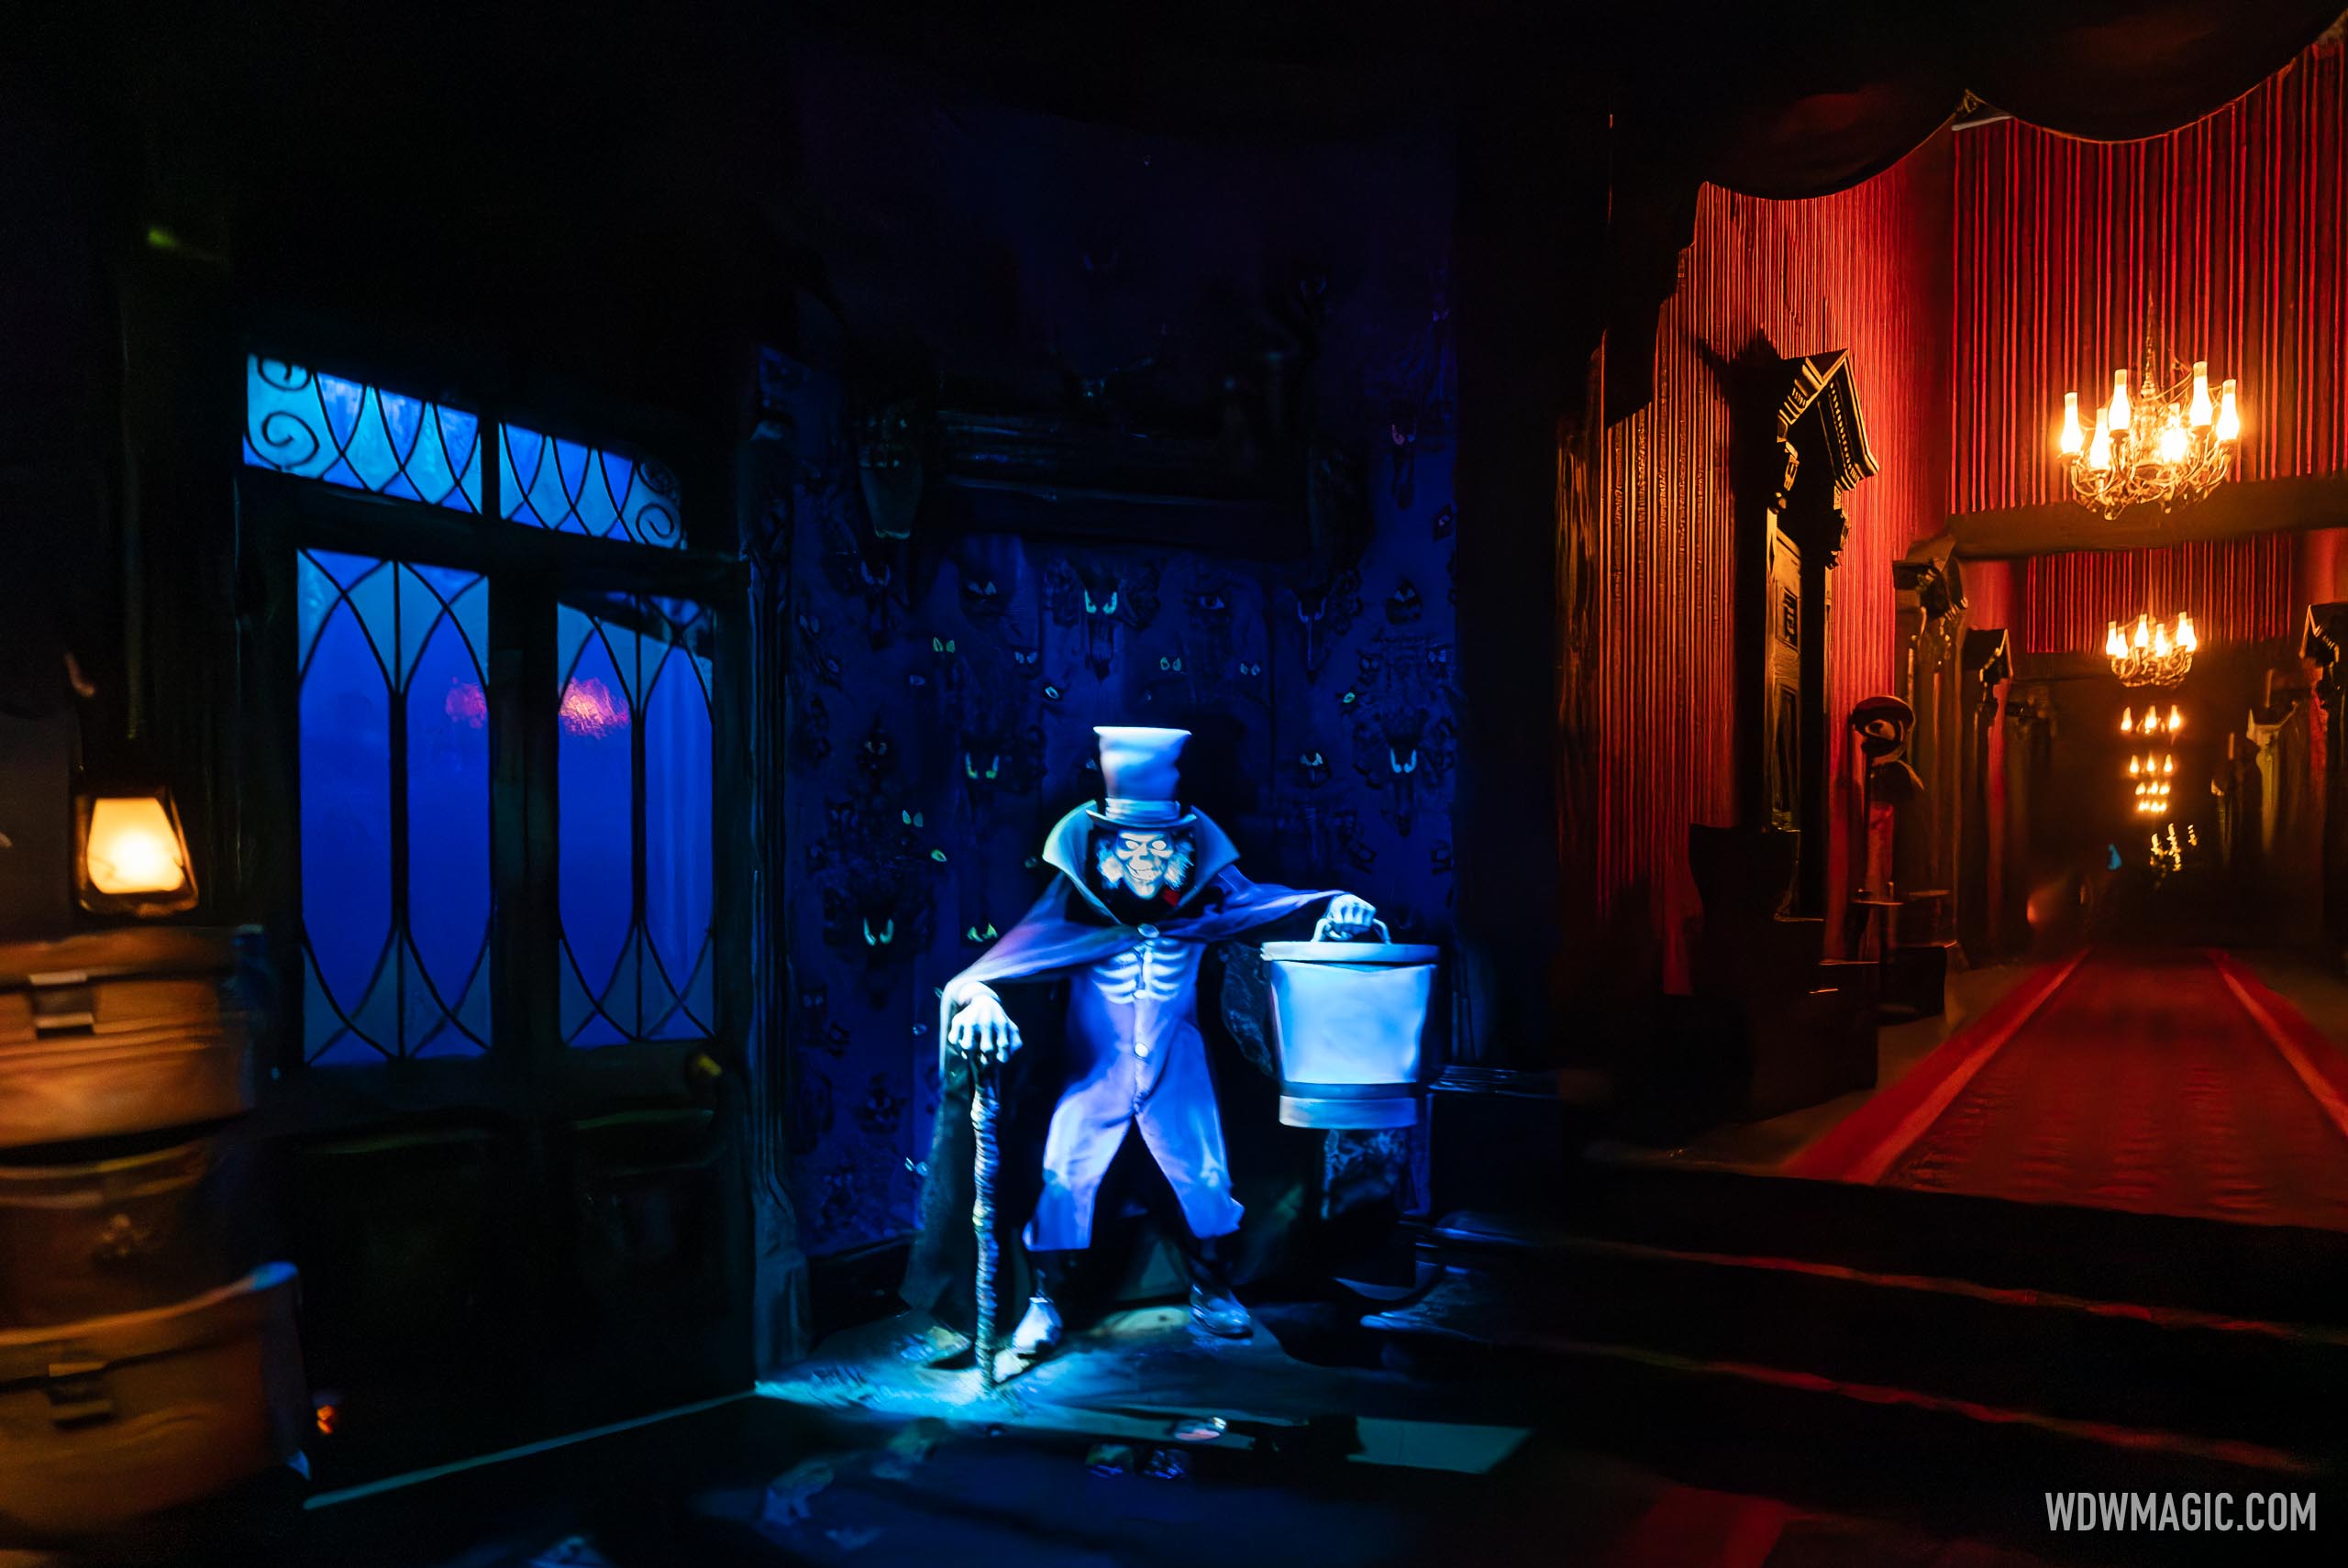 Iconic Hatbox Ghost materializes at Walt Disney World's Haunted Mansion